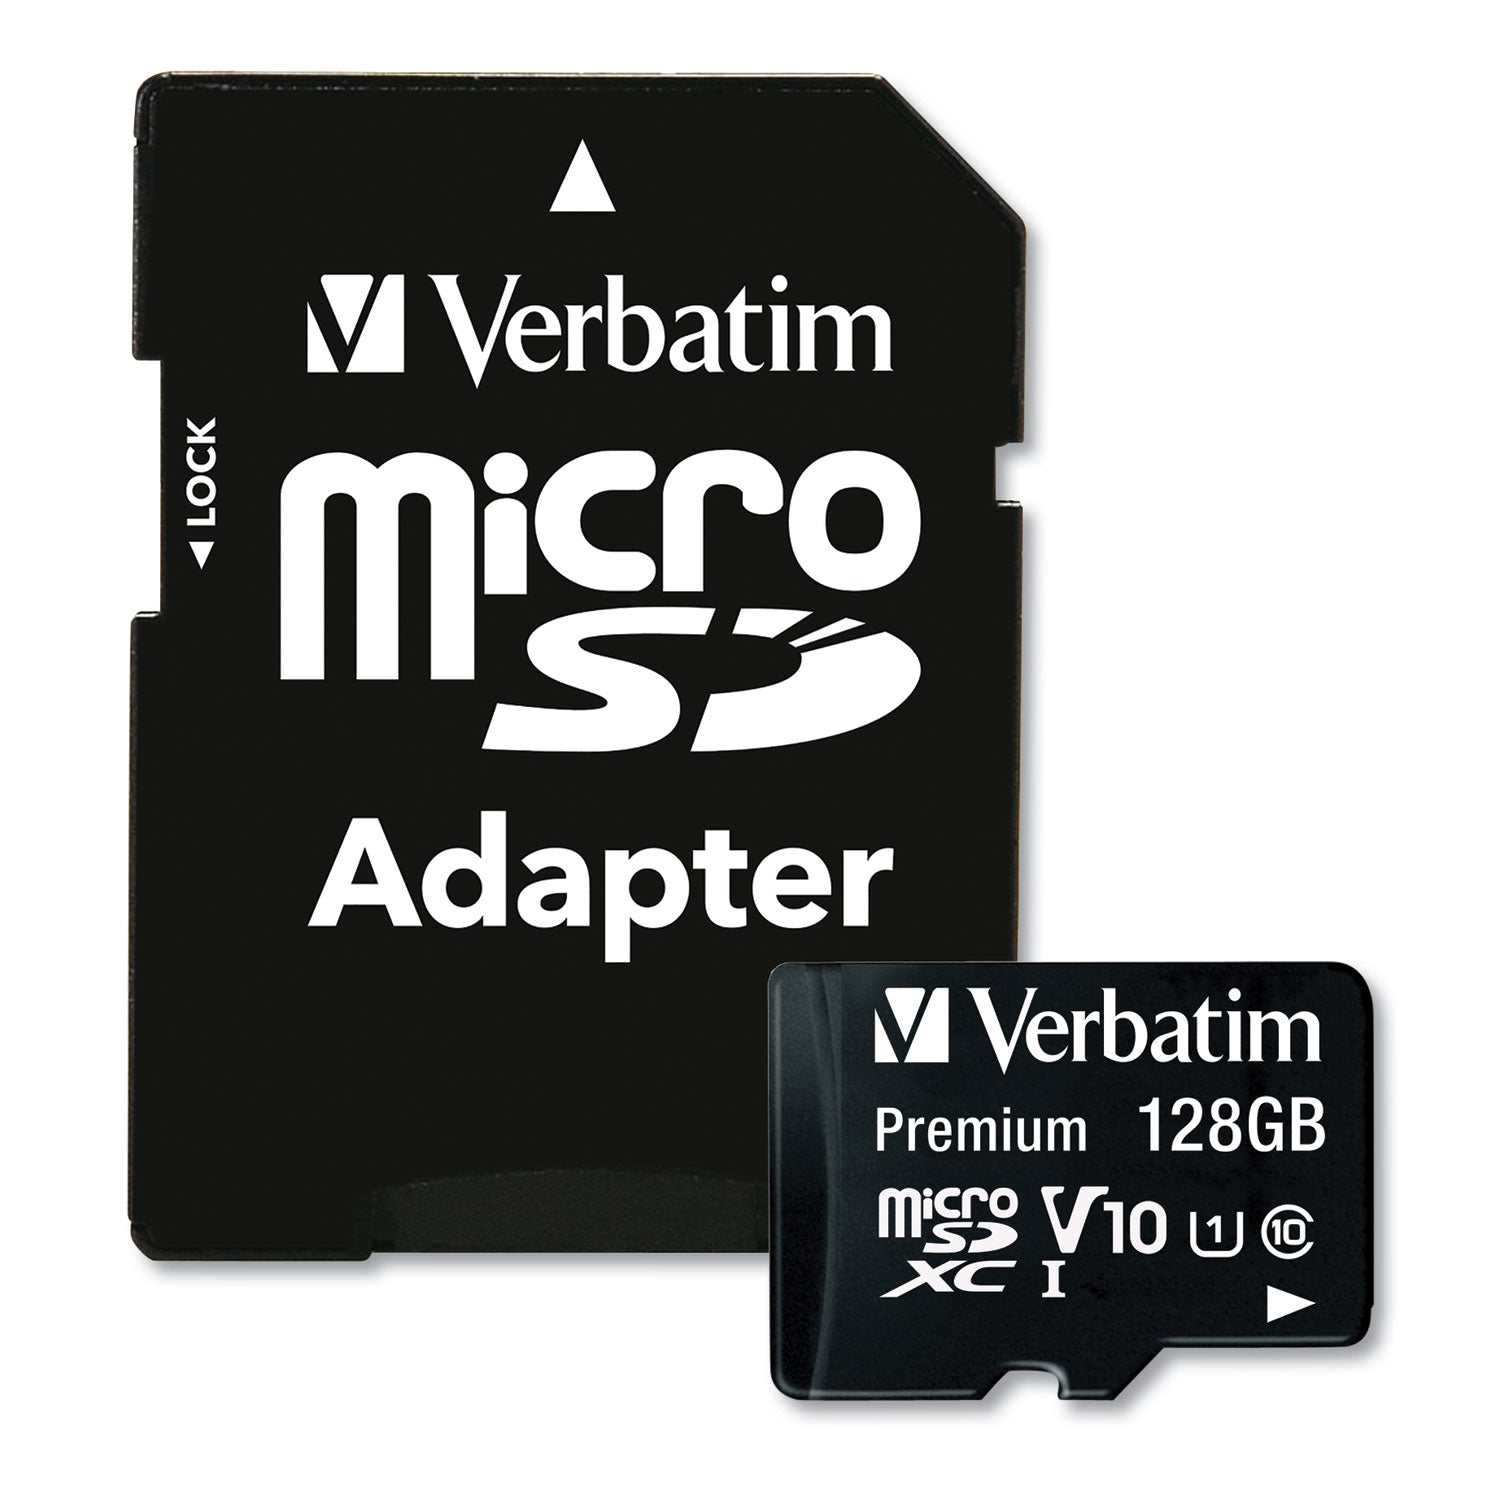 128gb-premium-microsdxc-memory-card-with-adapter-uhs-i-v10-u1-class-10-up-to-90mb-s-read-speed_ver44085 - 1